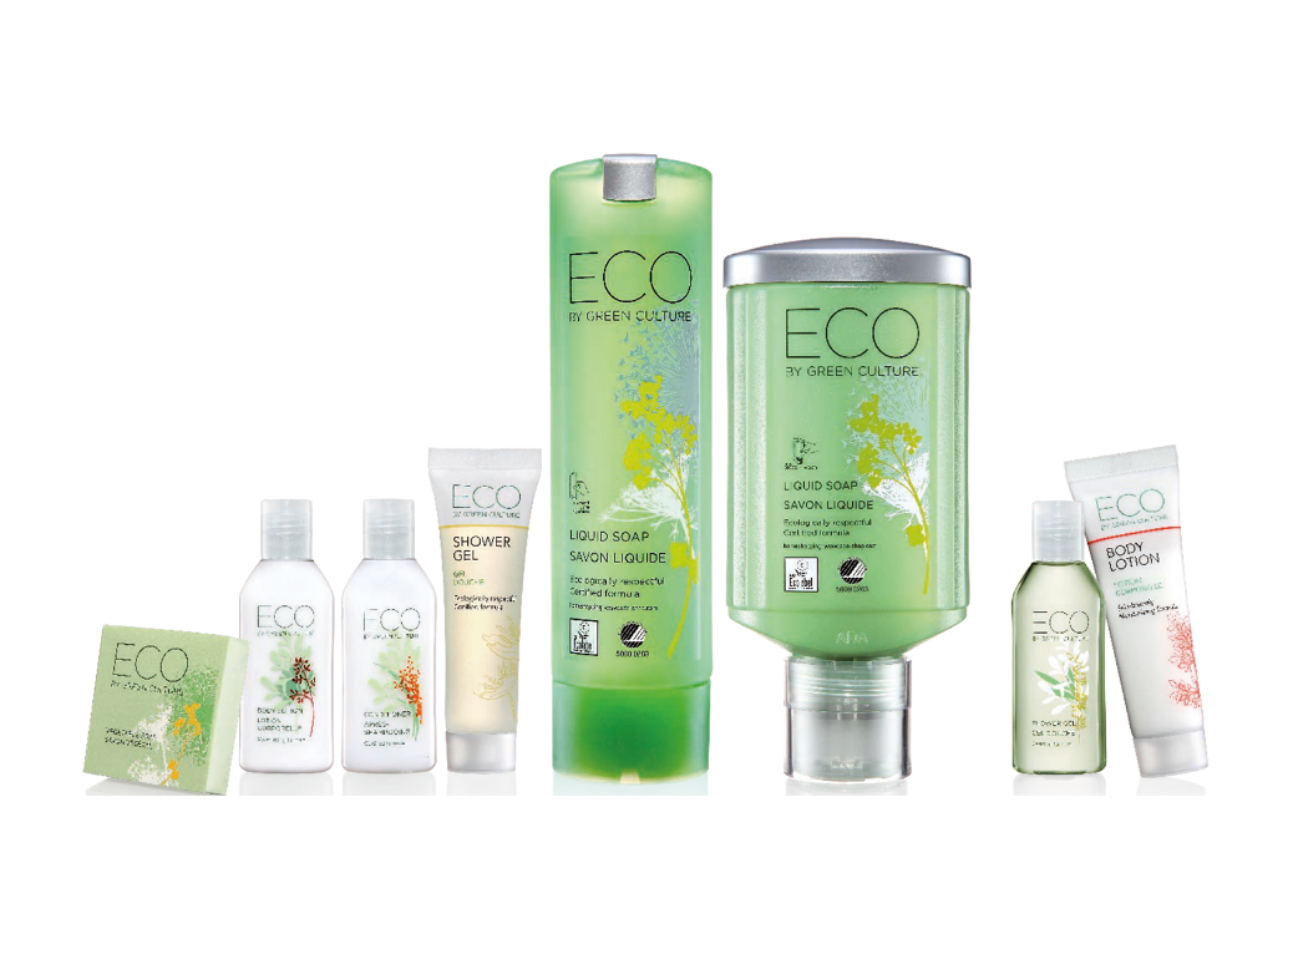 Eco by Green Culture Haarspülung, 30 ml